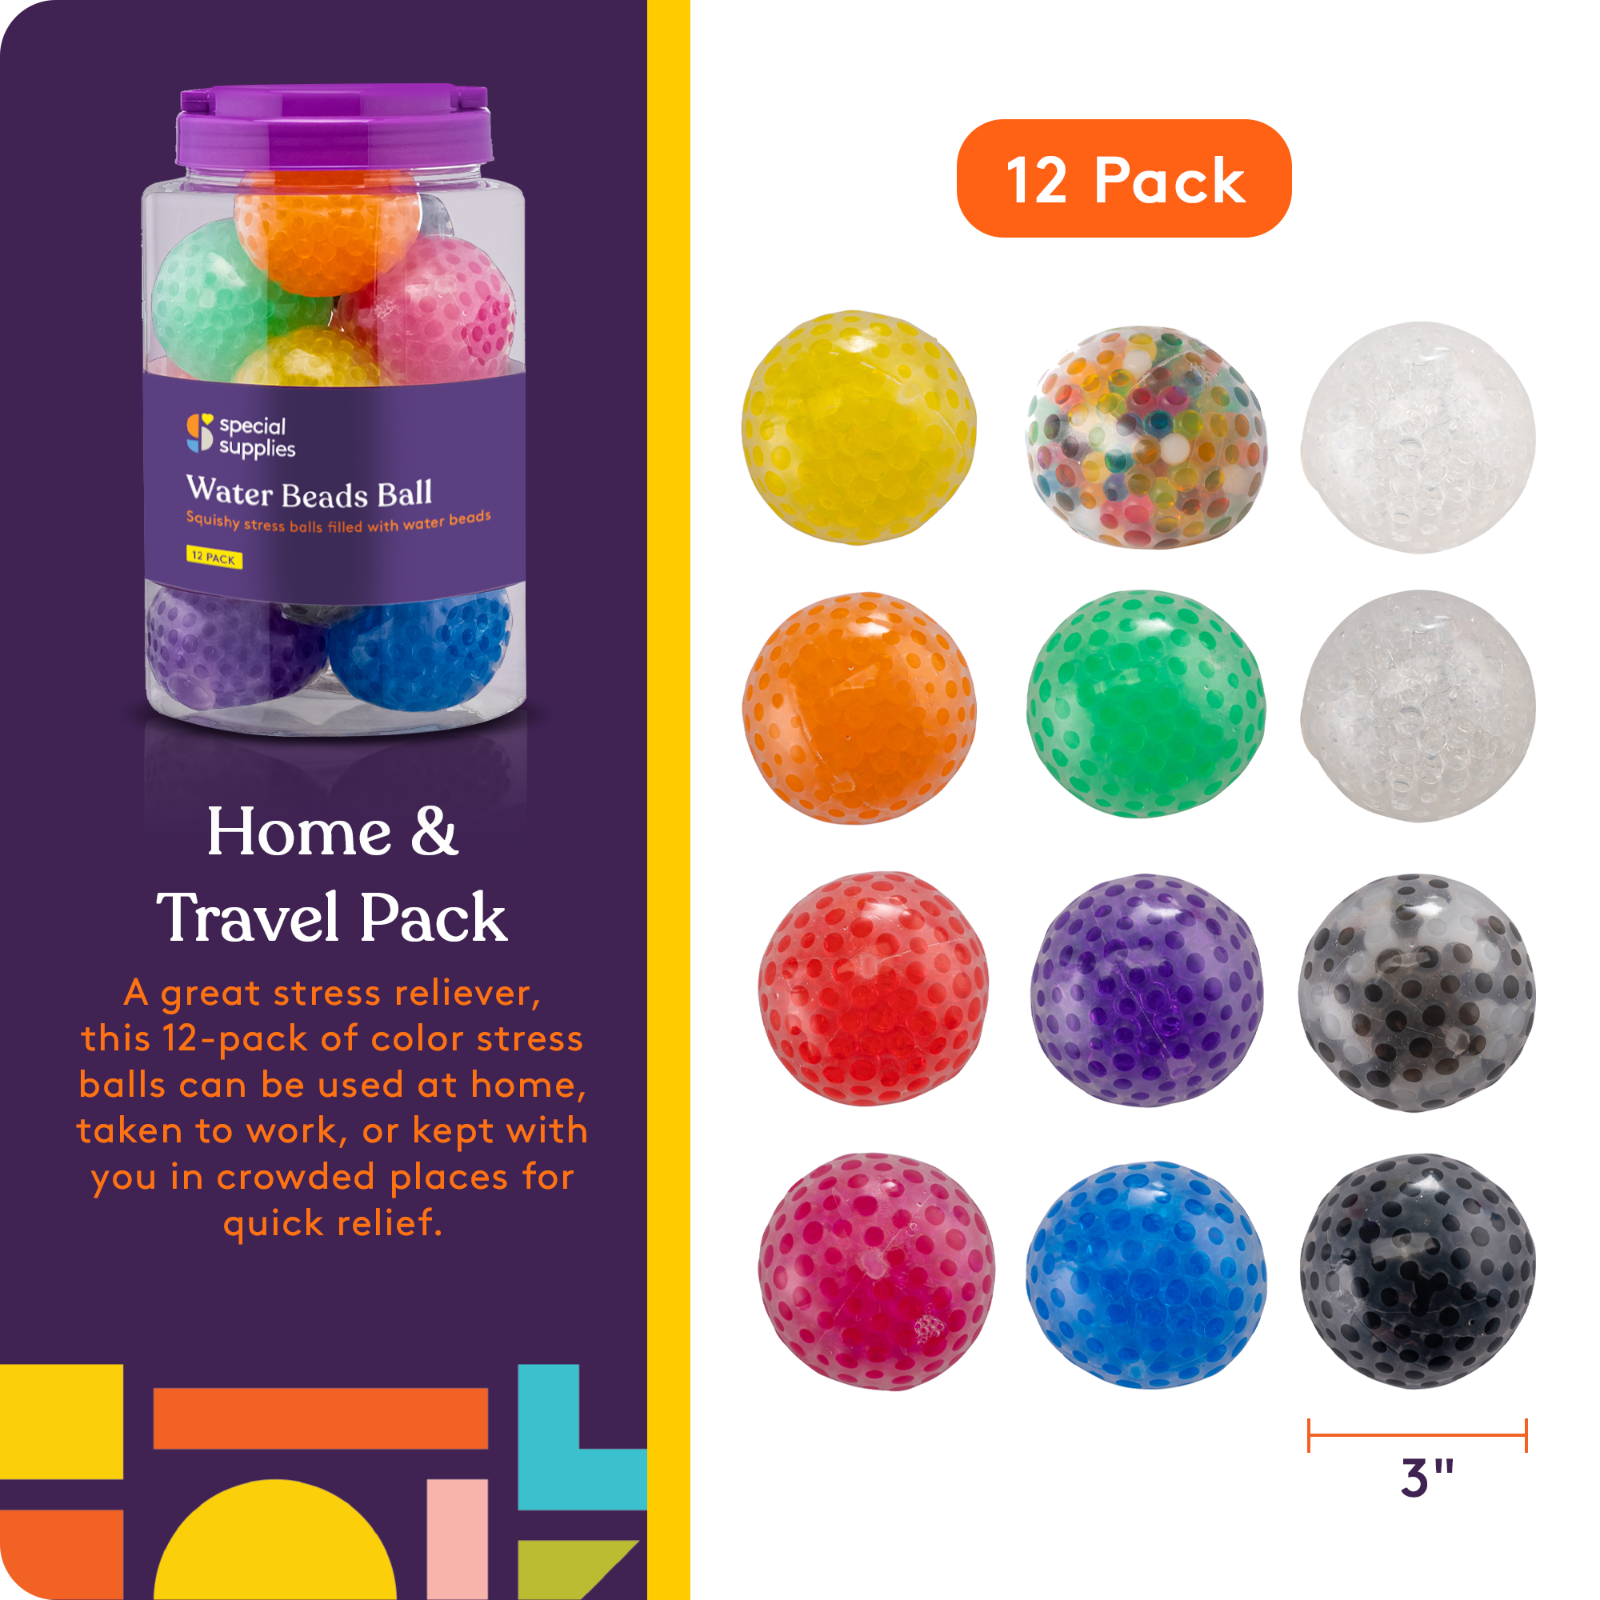 Special Supplies Squish Water Beads Stress Ball (12-Pack) Squeeze, Color  Sensory Toy - Relieve Tension, Stress - Home, Travel and Office Use - Fun  for Kids and Adults (Squishy)